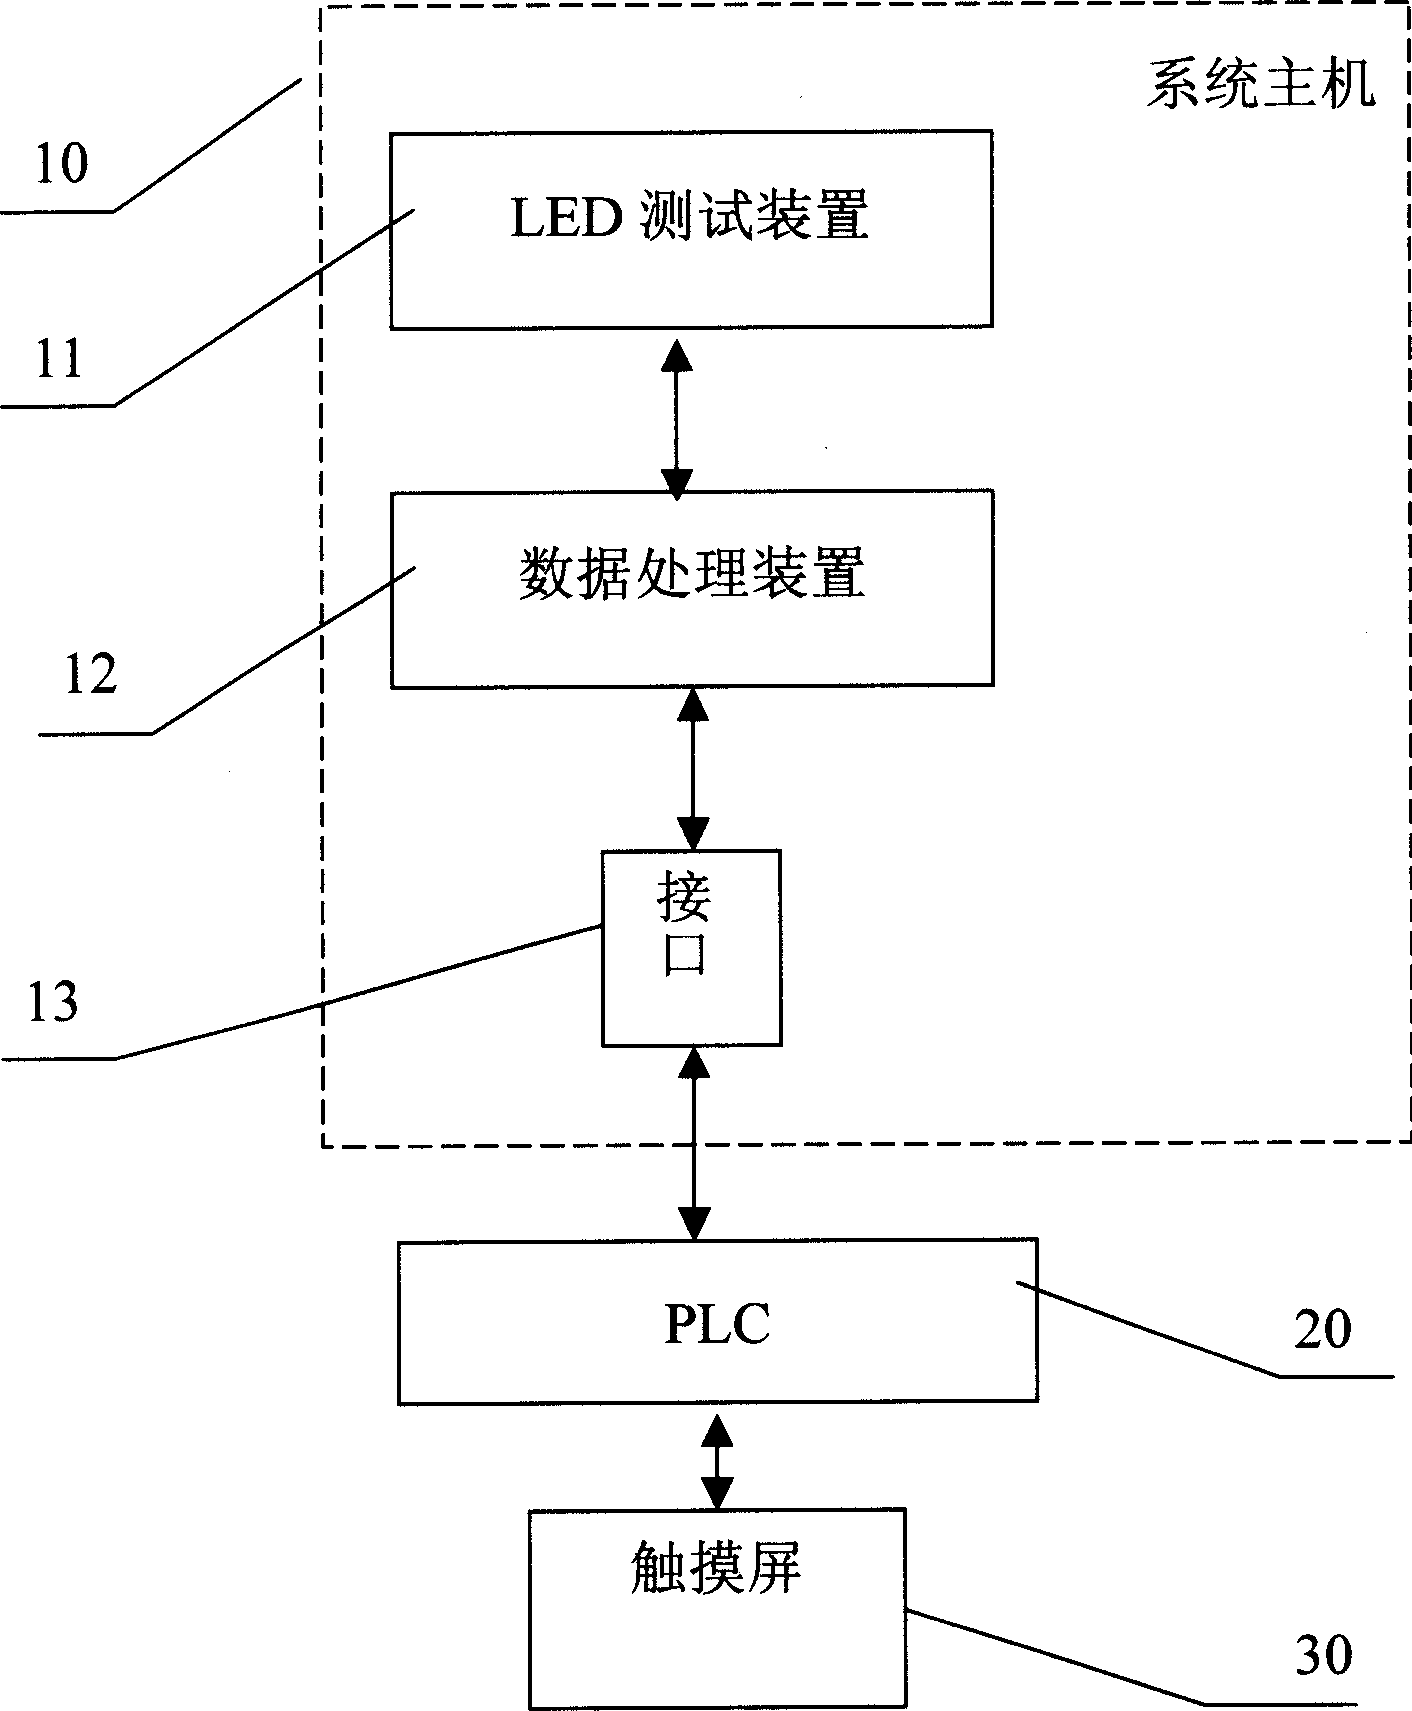 Automated testing system and method for light emitting diode